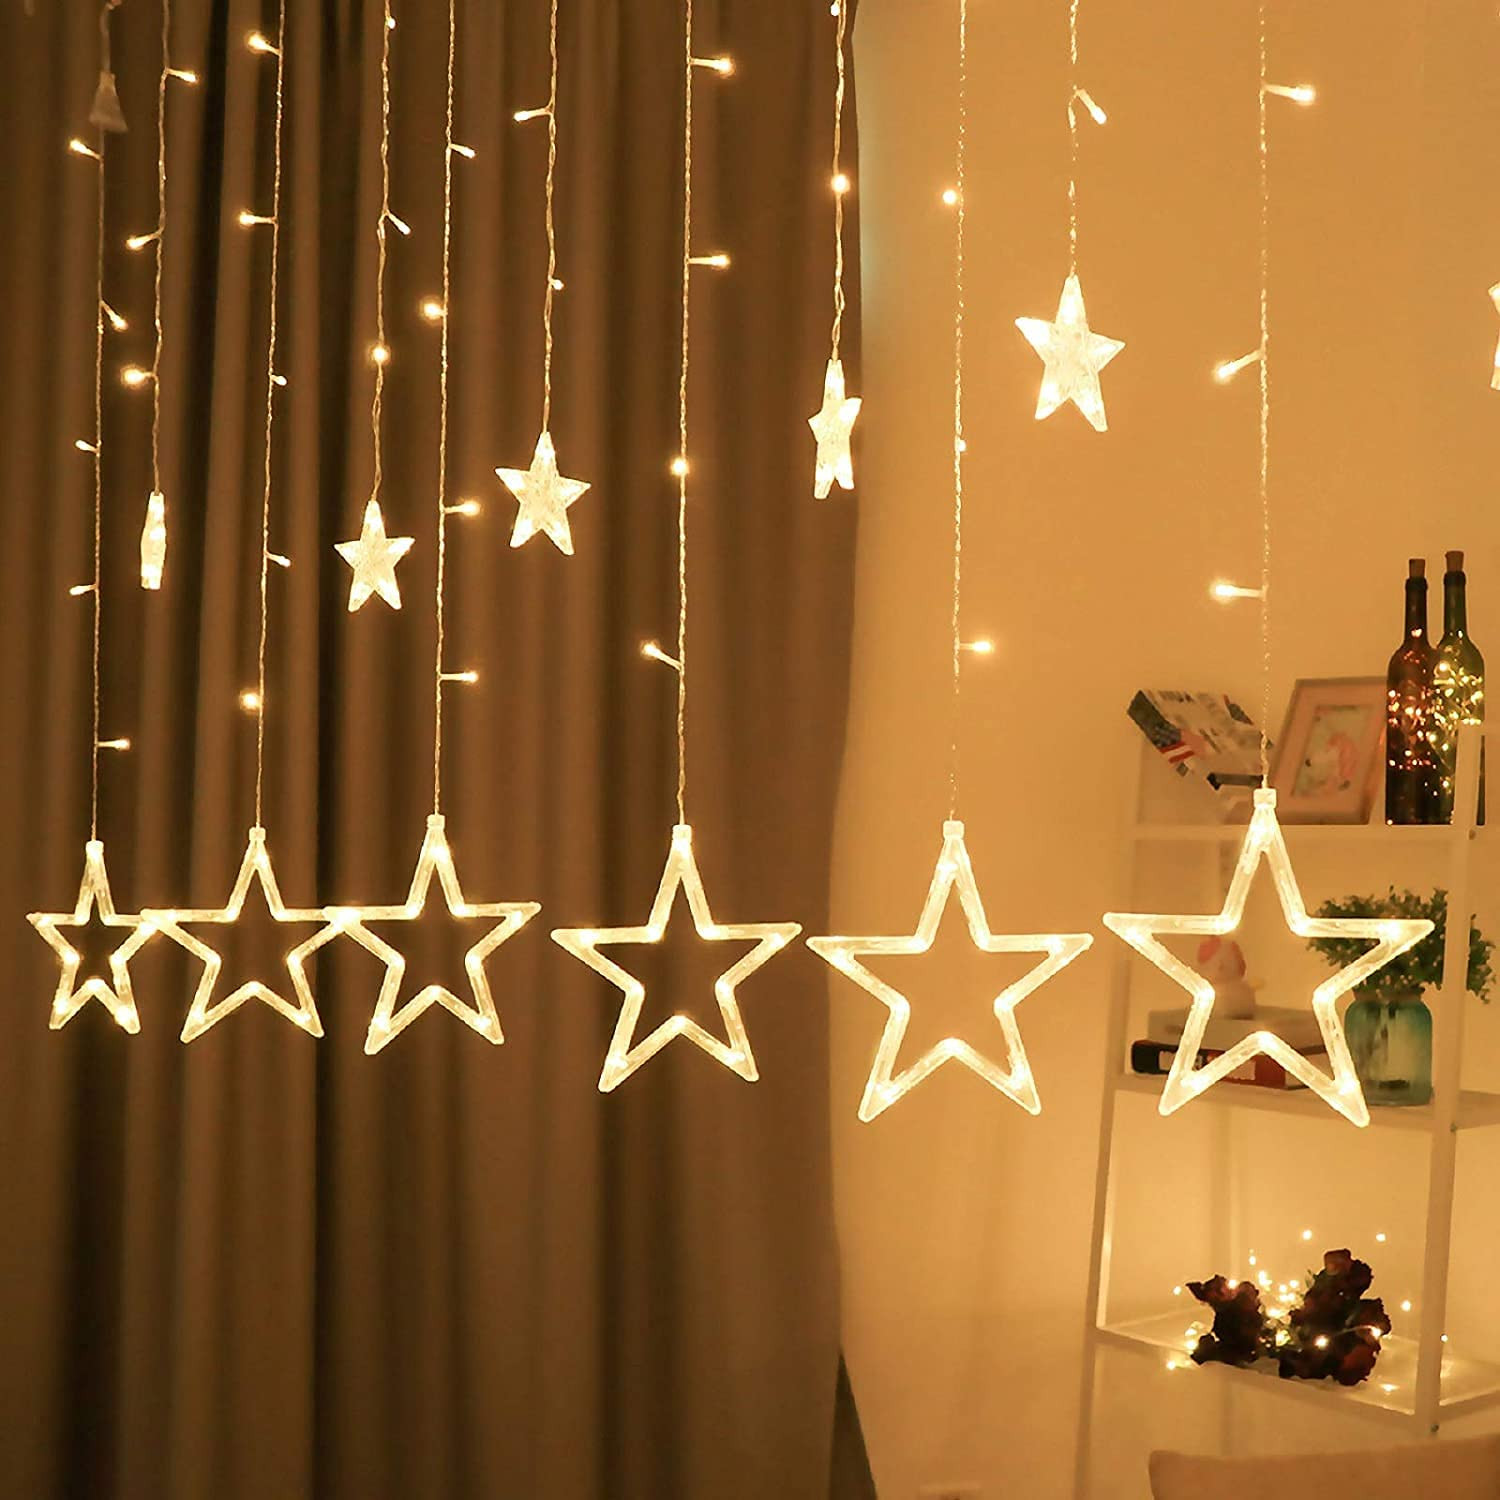 12 Stars Curtain String Lights @ ₹ 349 Window Curtain Lights with 8 Flashing Modes Decoration for Christmas, Wedding, Party, Star Series Light, Home, Patio Lawn, Warm White